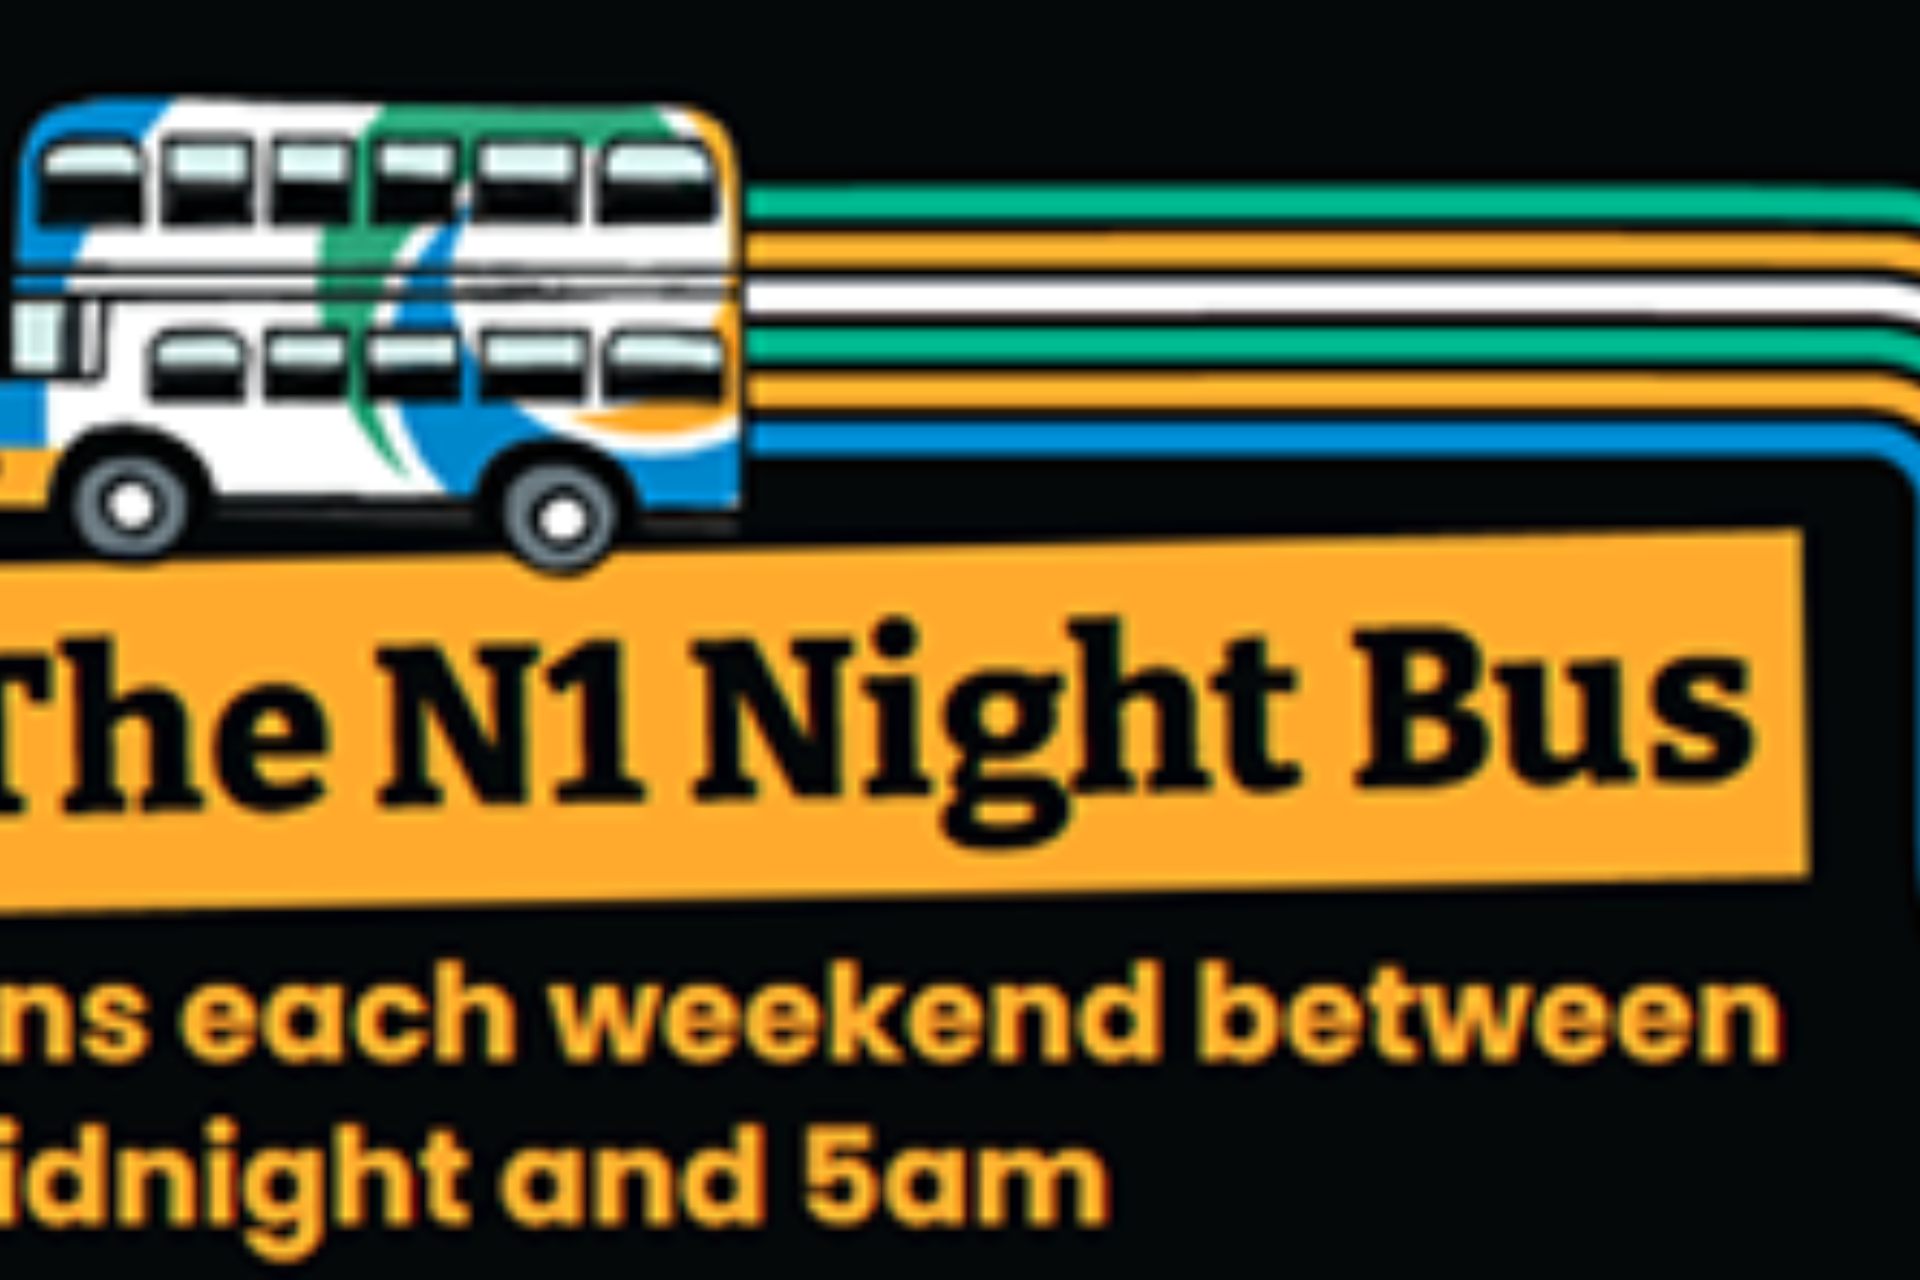 Night Bus poster with bus illustration